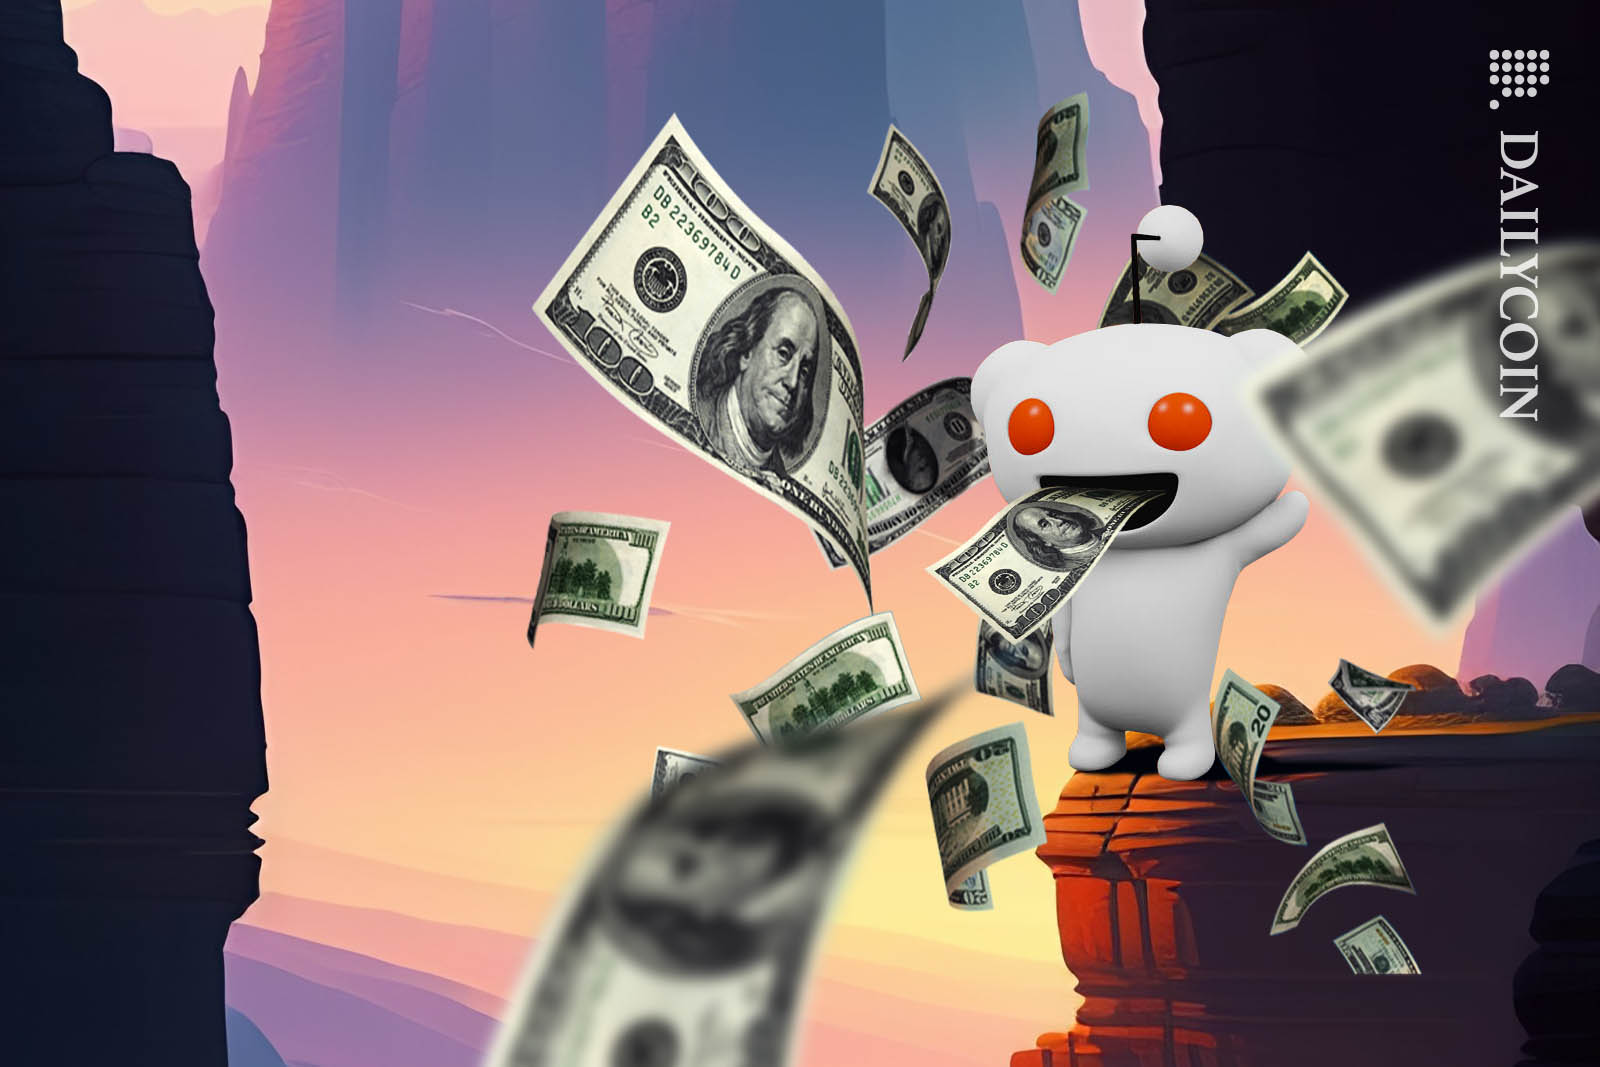 Reddit mascot standing on a cliff spitting money into the valley.